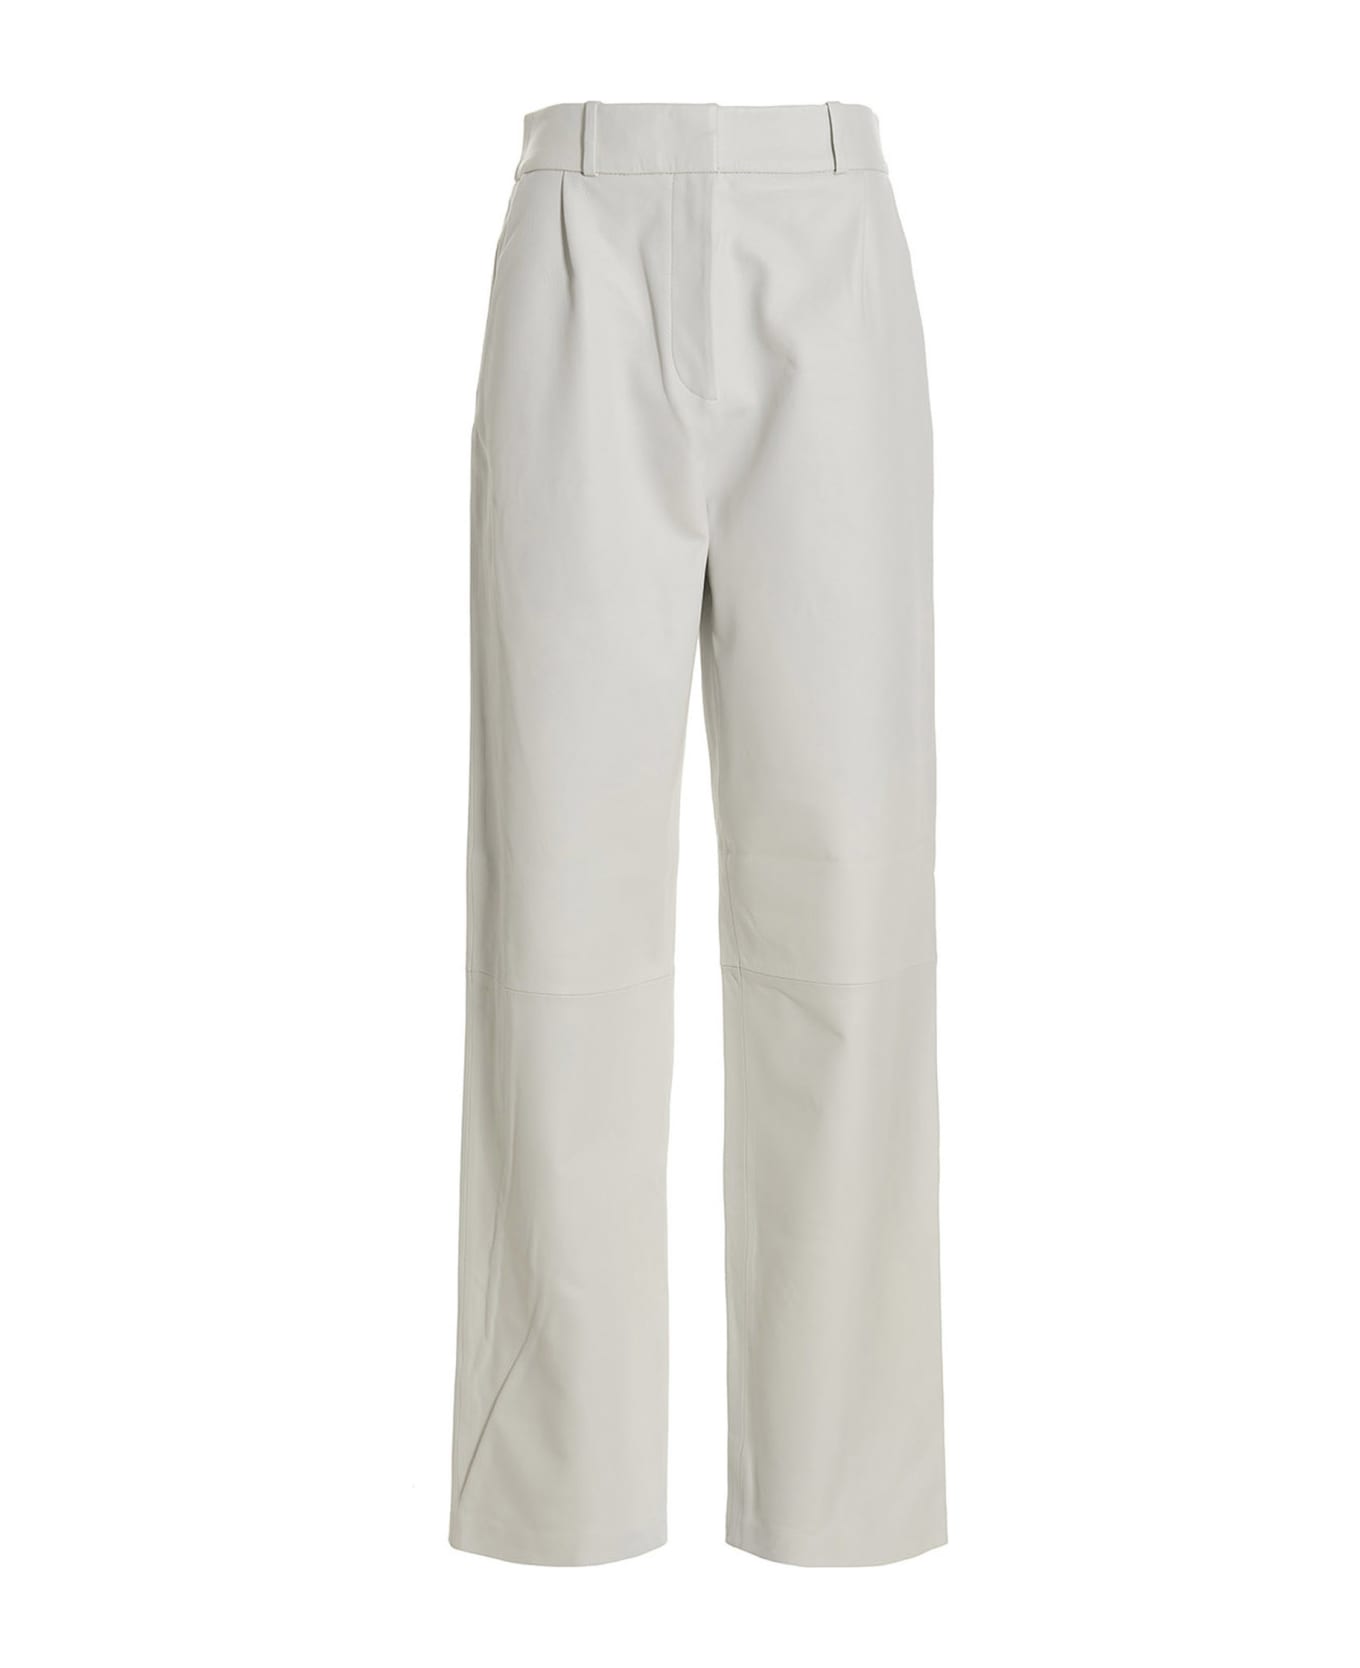 KASSL Editions Leather Pants - White